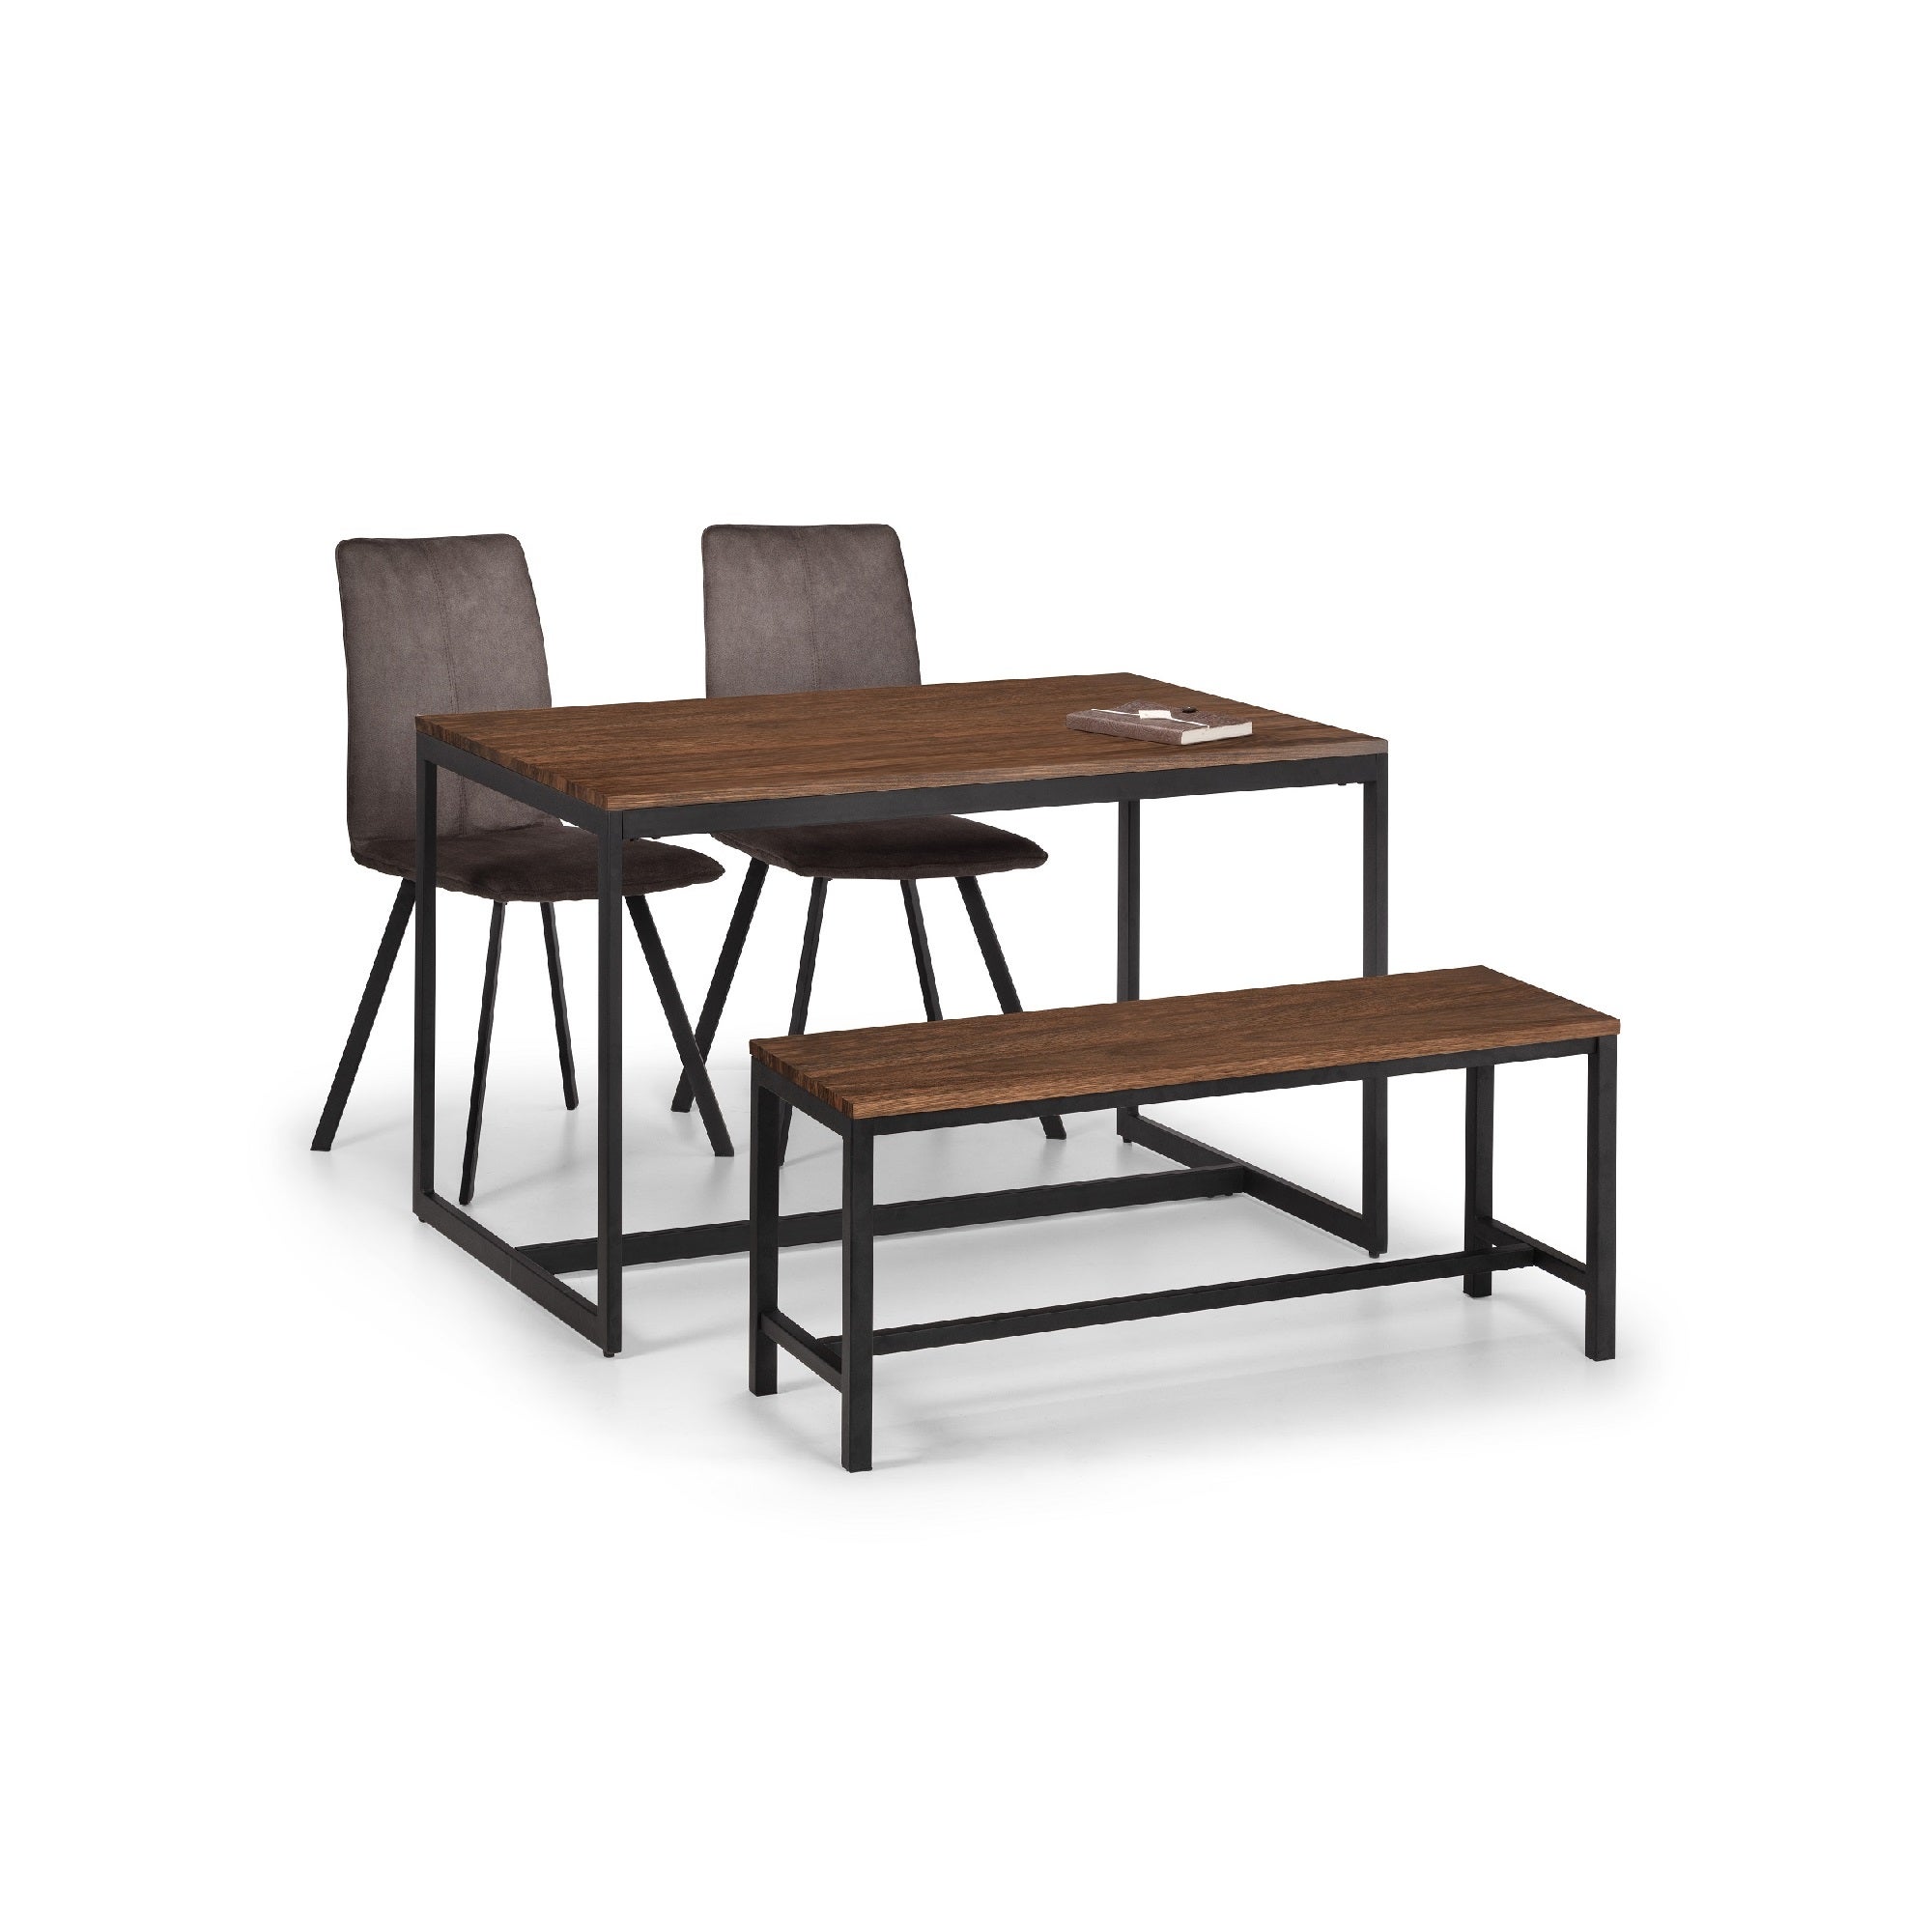 Tribeca Rectangular Dining Table with 2 Monroe Chairs and Bench, Brown